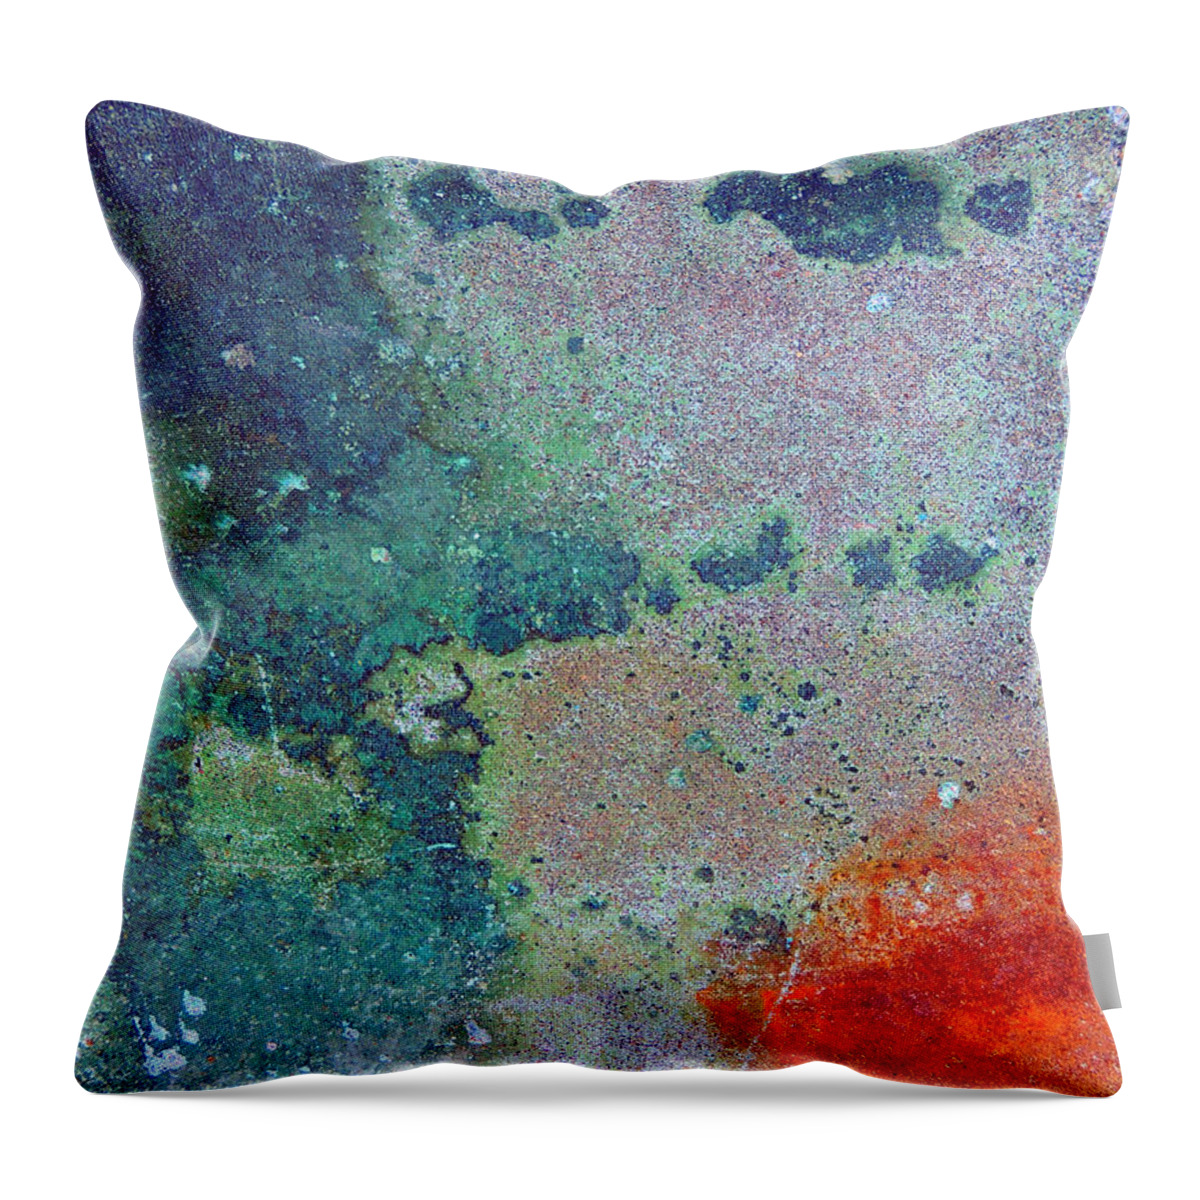 Marcia Lee Jones Throw Pillow featuring the photograph The Kiss by Marcia Lee Jones